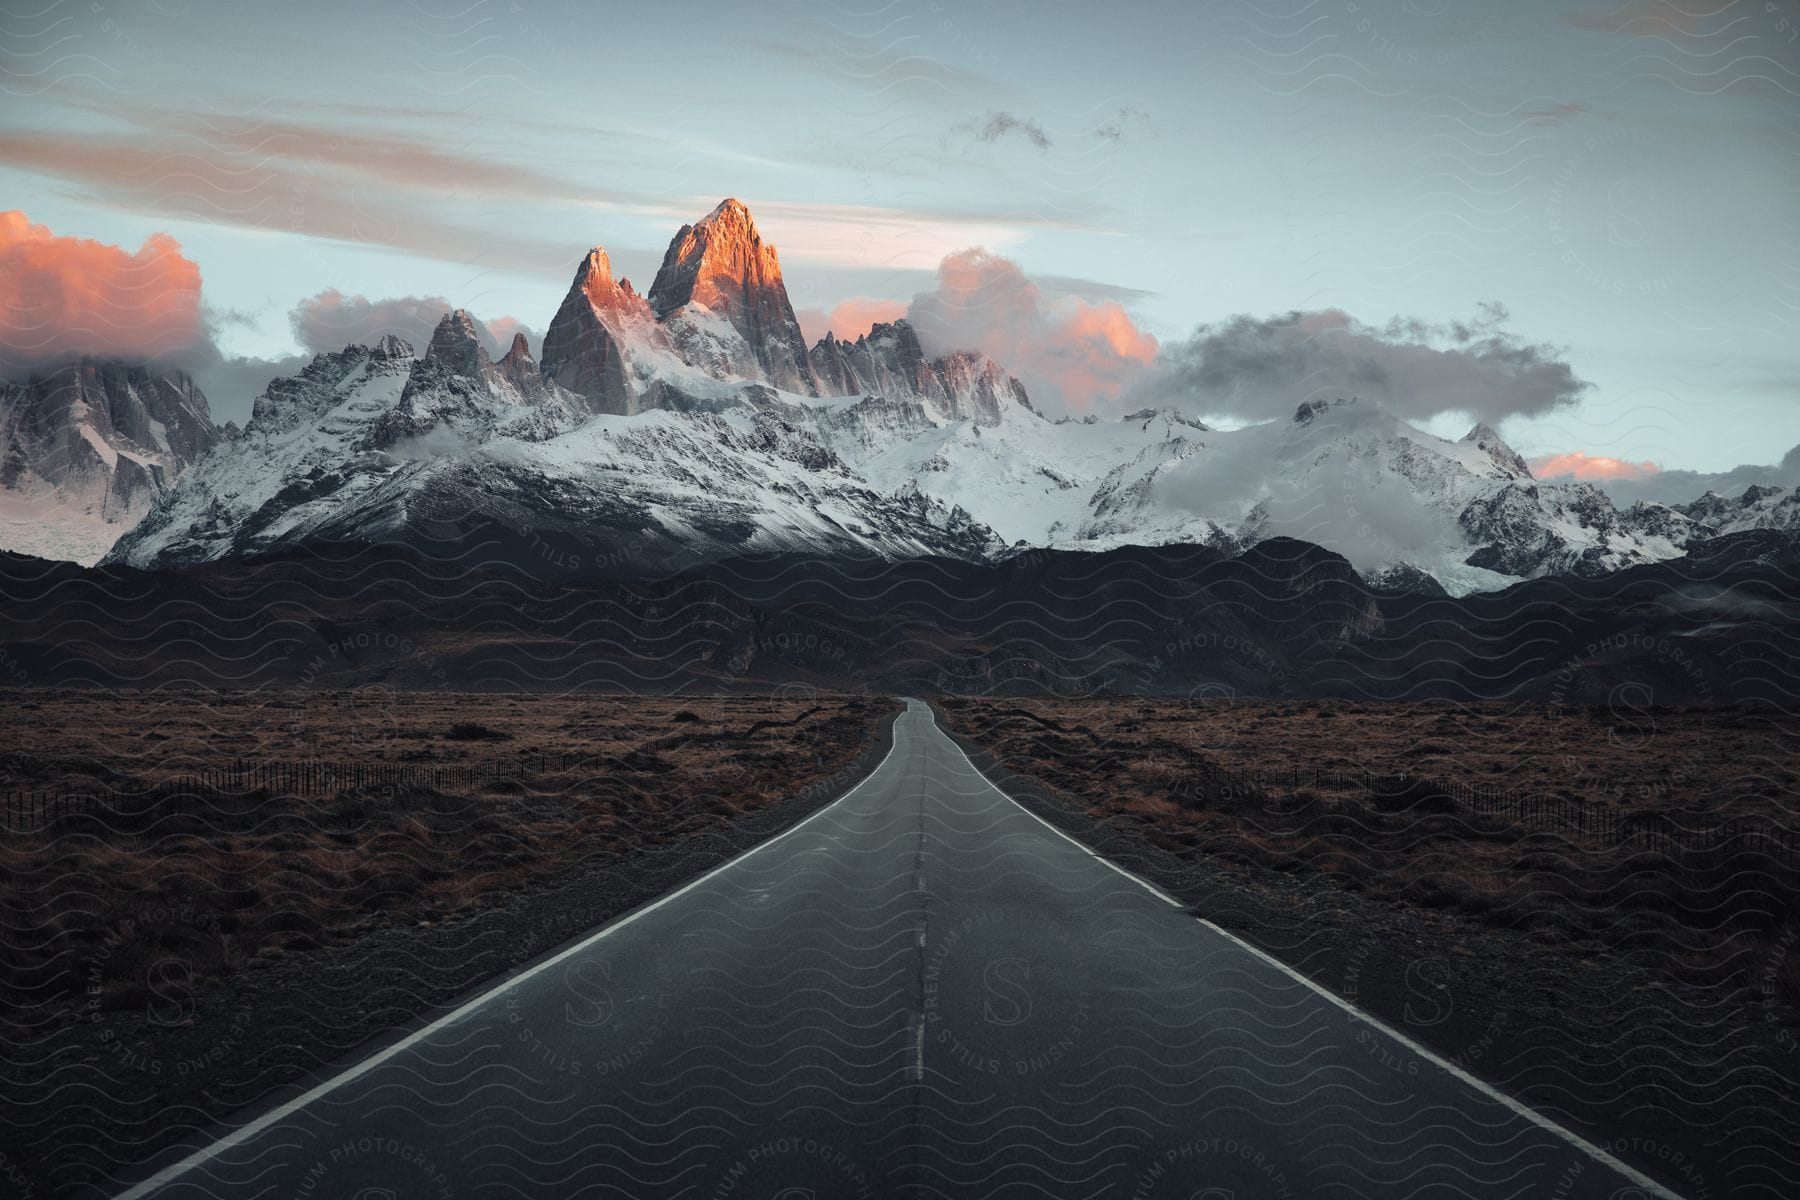 A road leading to a mountain landscape at dusk